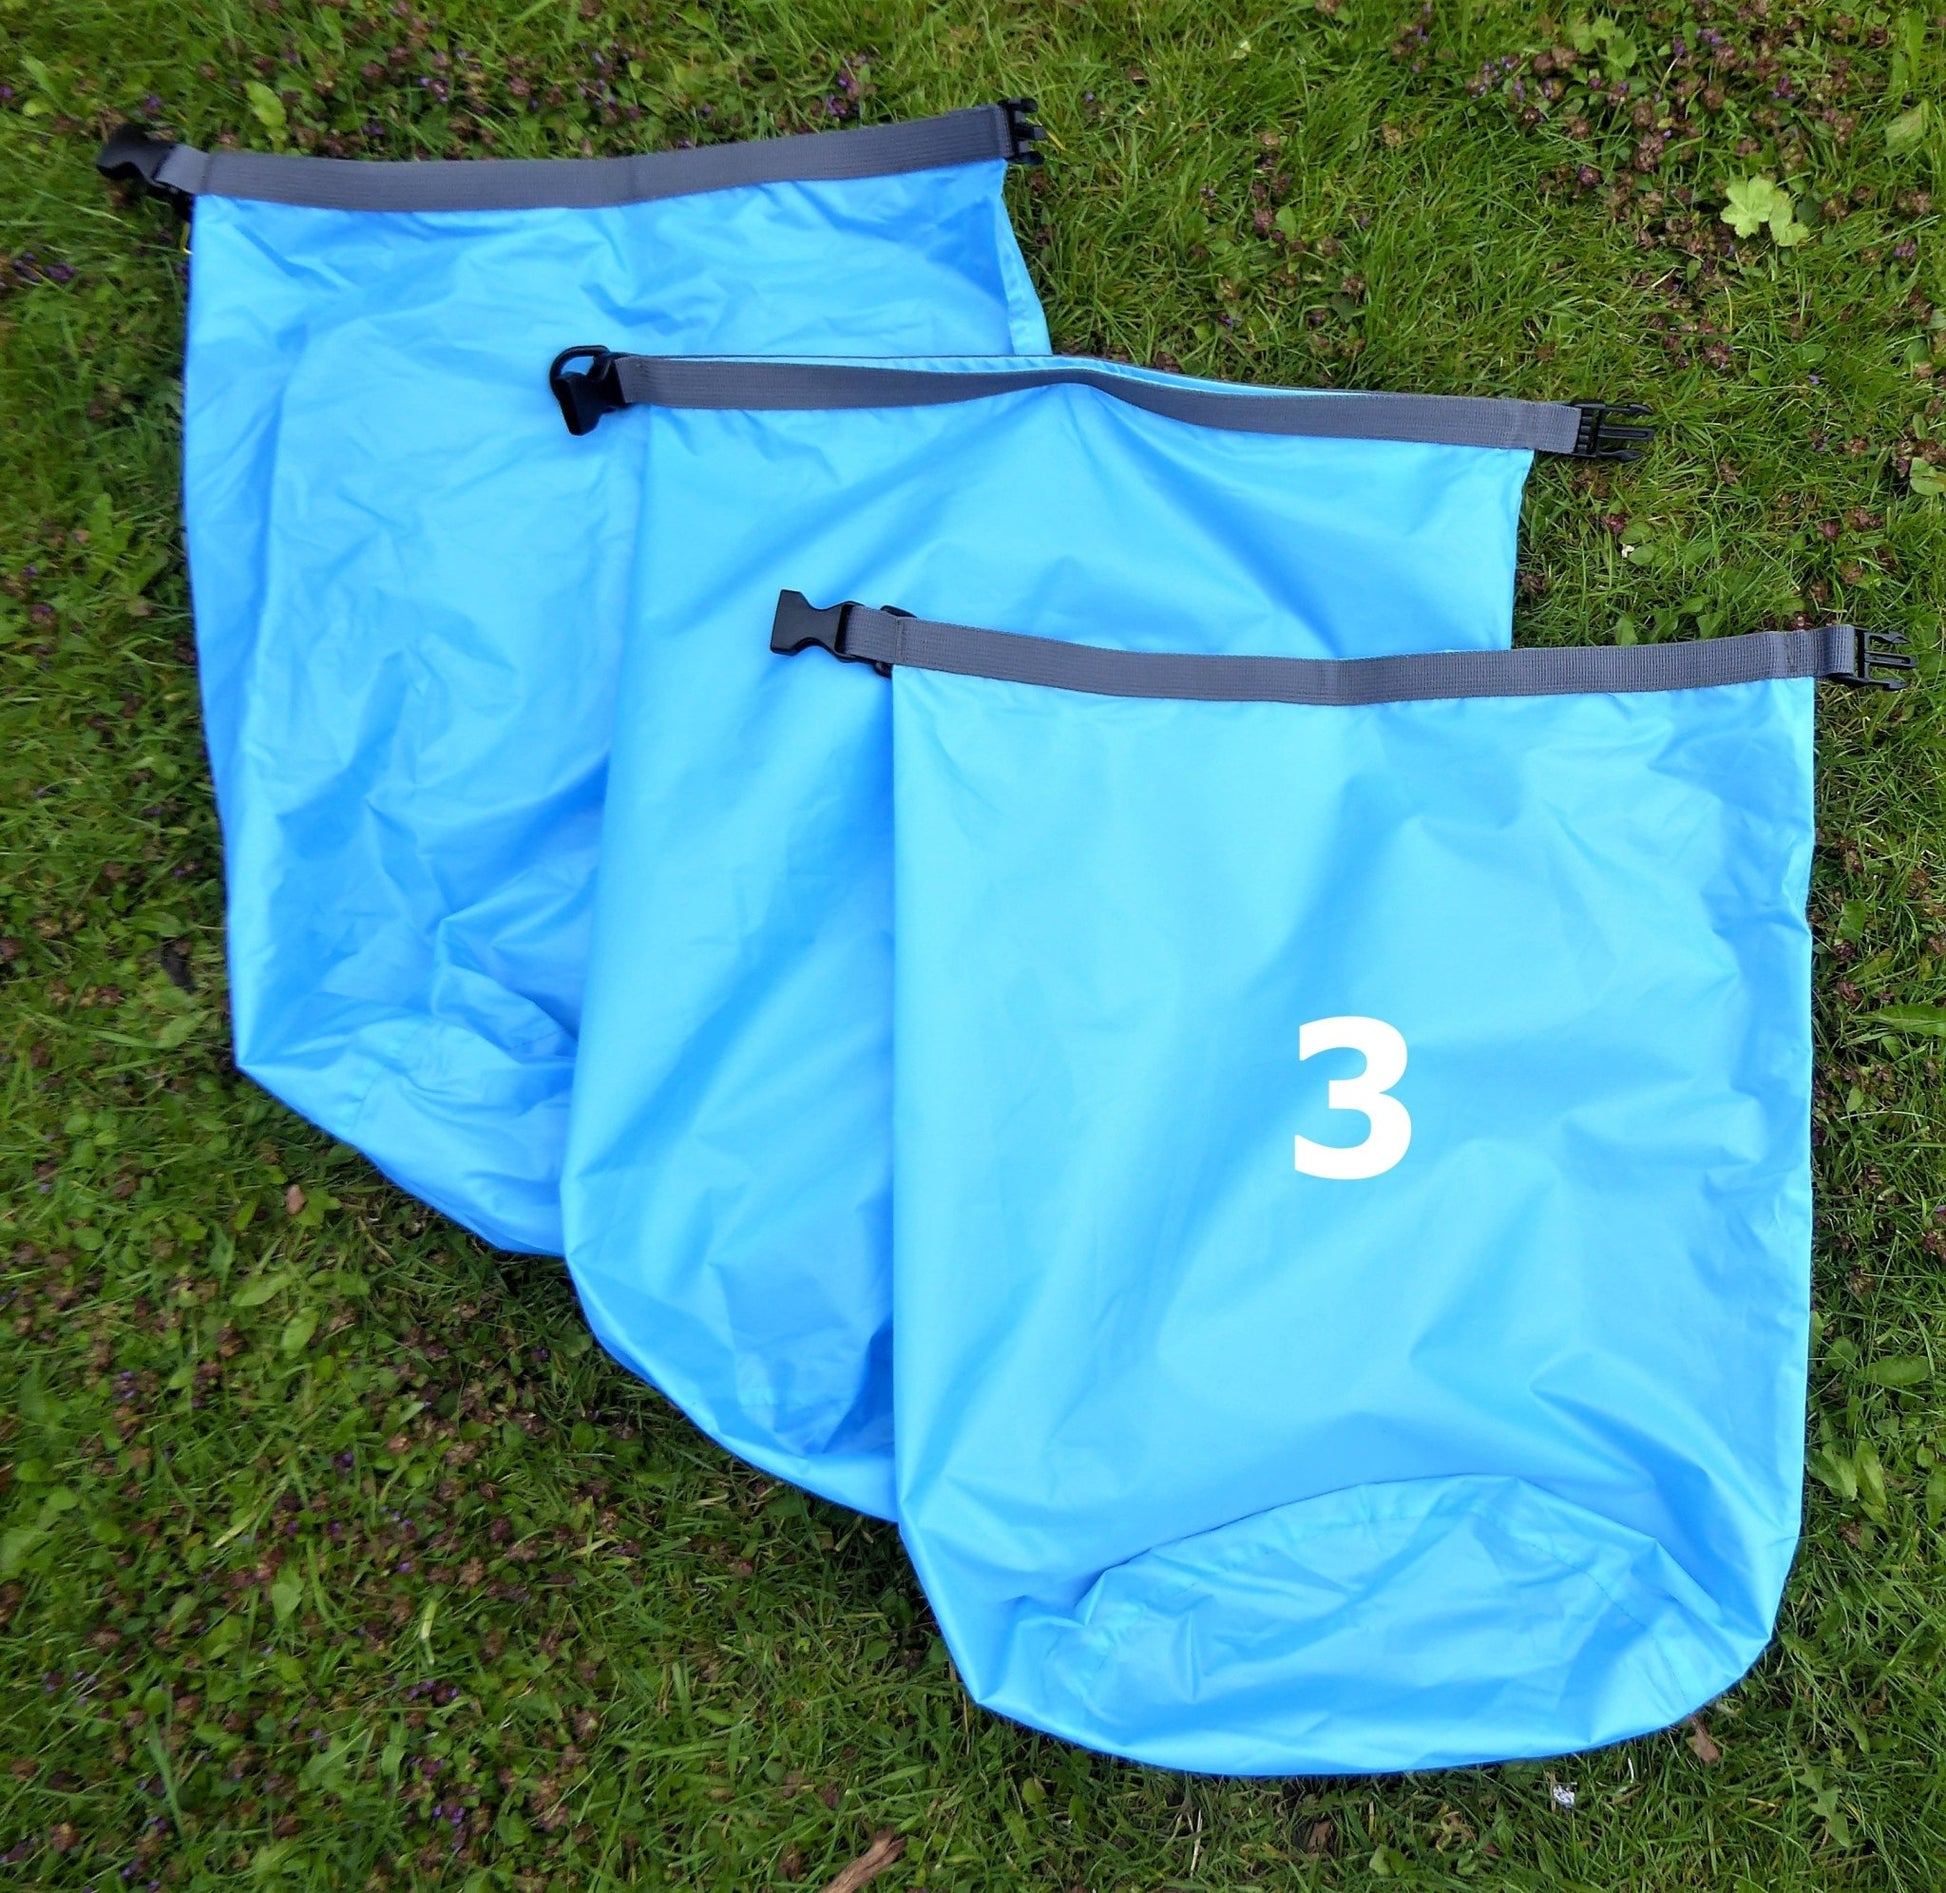 20L Dry Bags a useful and versatile piece of equipment for outdoor activities such as hiking, camping, kayaking, canoeing  Huggins Attic 3   [Huggins attic]